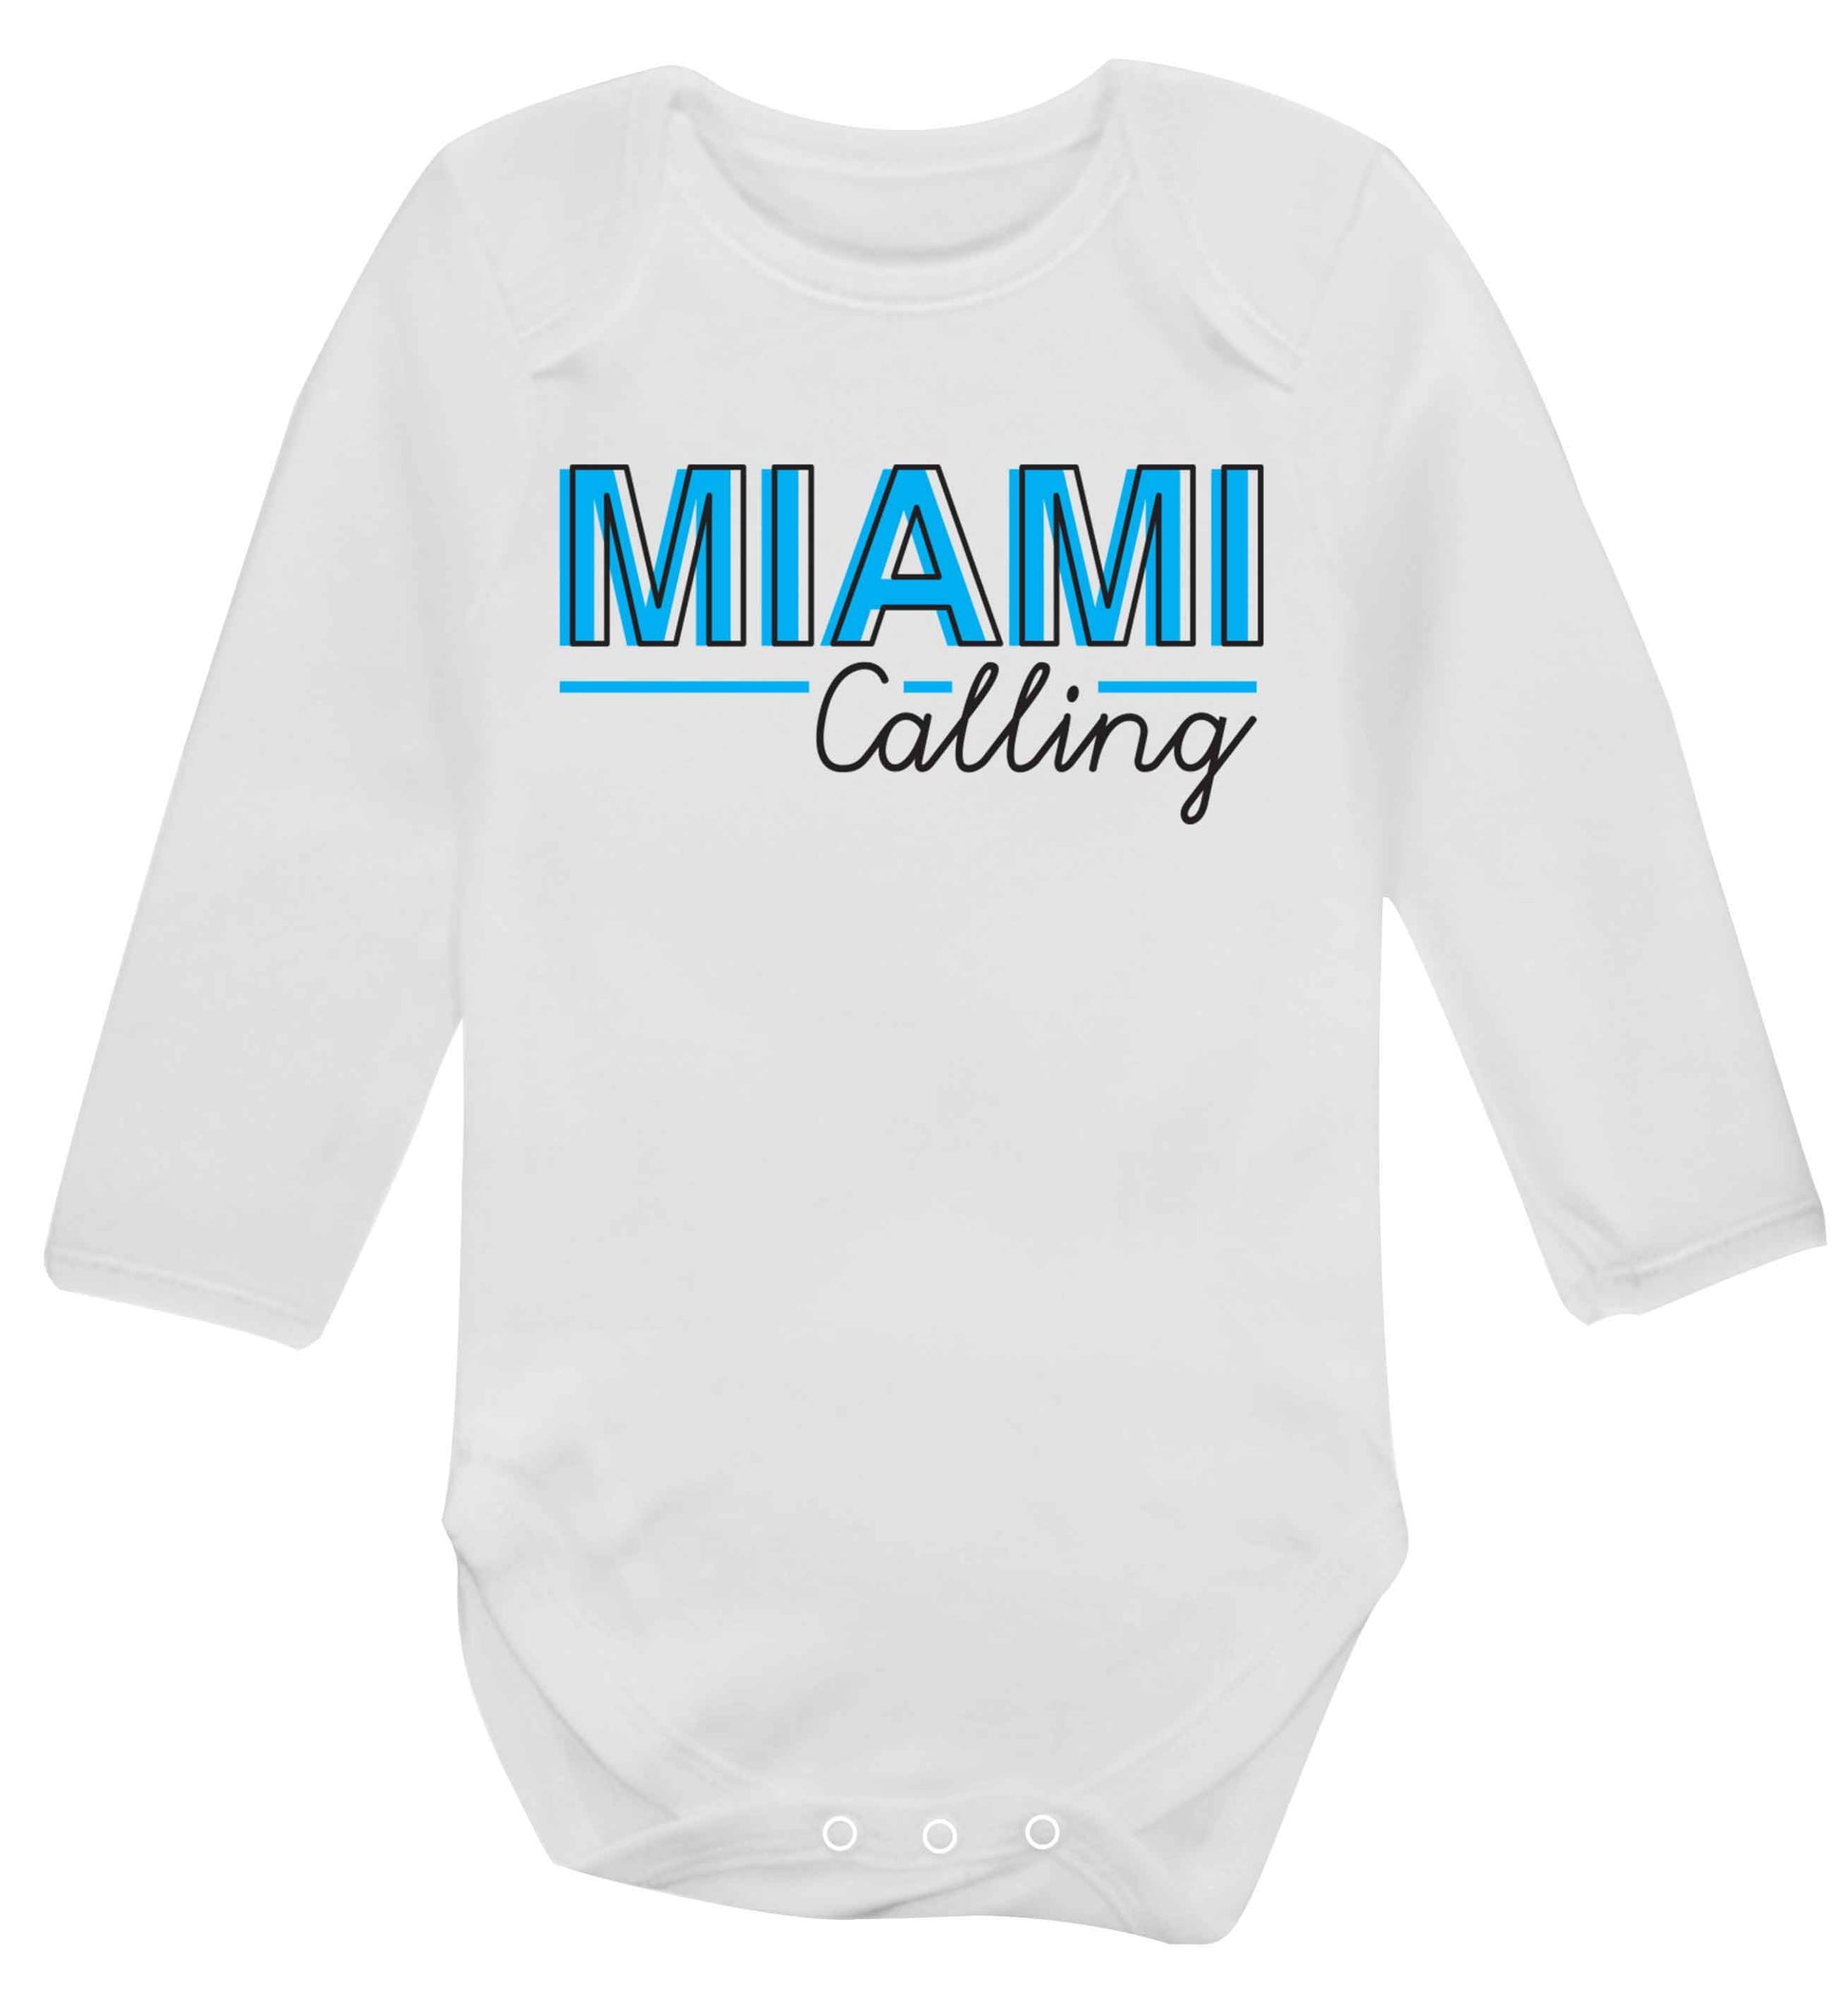 Miami calling Baby Vest long sleeved white 6-12 months